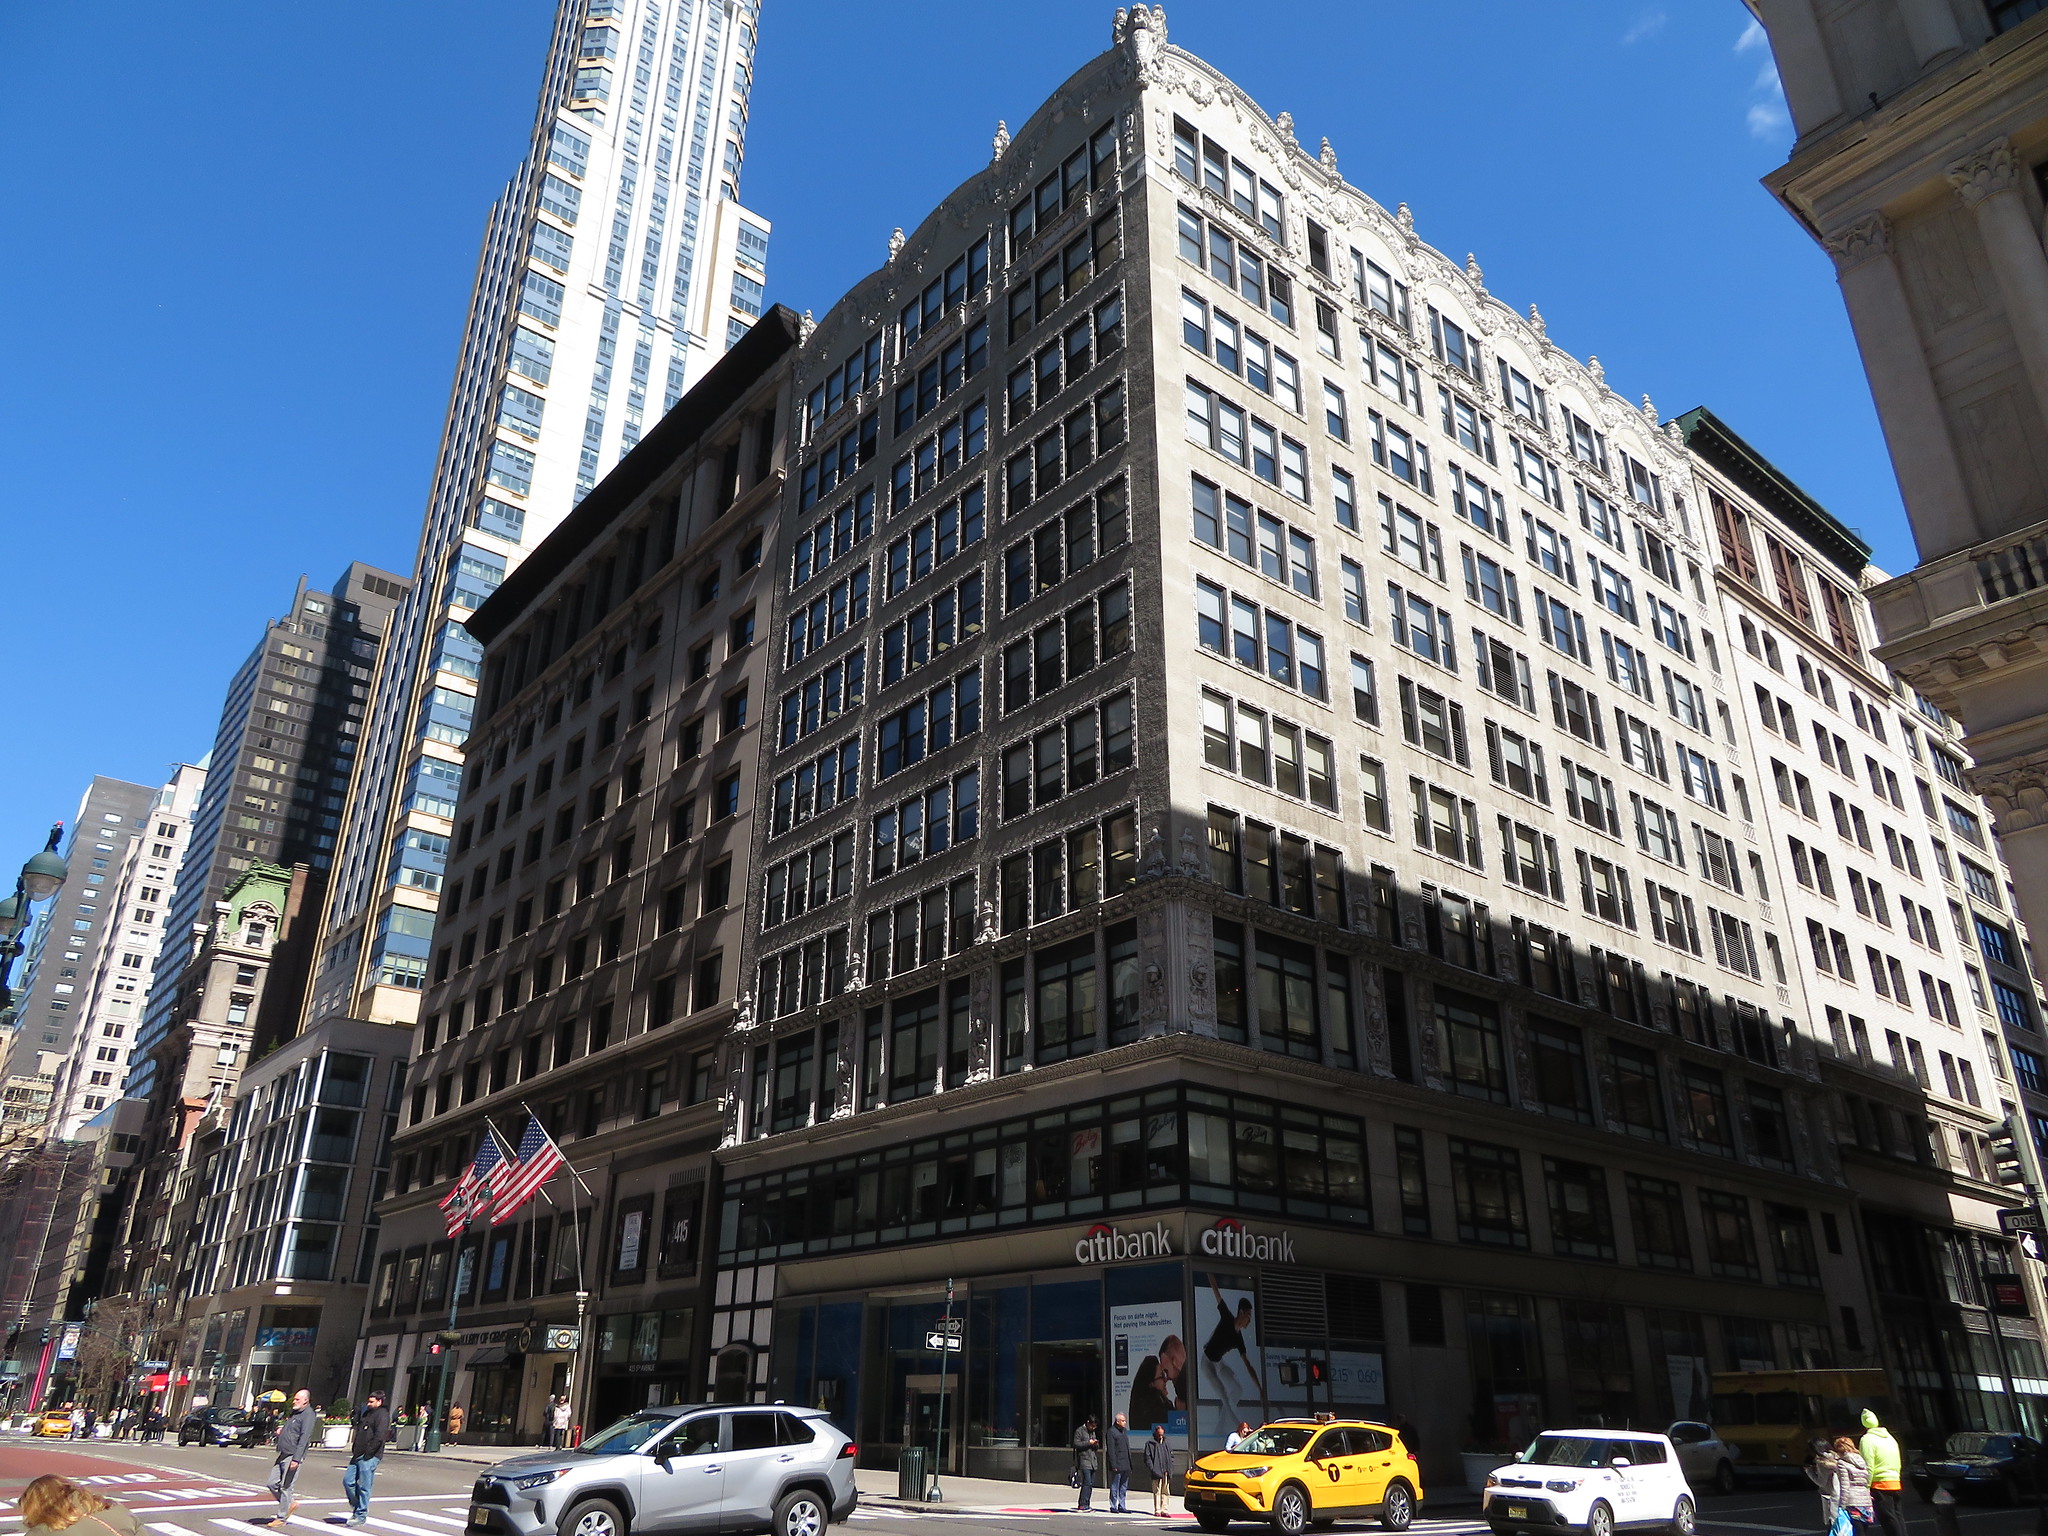 <p>If you’re looking for a swanky shopping district in NY, this it is.</p><p>Fifth Avenue is the top shopping destination for high-end shops and department stores. In fact, it is known as the <strong>world’s most expensive retail destination.</strong></p><p>It also boasts Millionaire’s Row—a stretch of late 19th century mansions overlooking Central Park.</p><p><strong>Features:</strong> Shopping, museums, mansions</p><p>Ken Lund, Flickr</p>